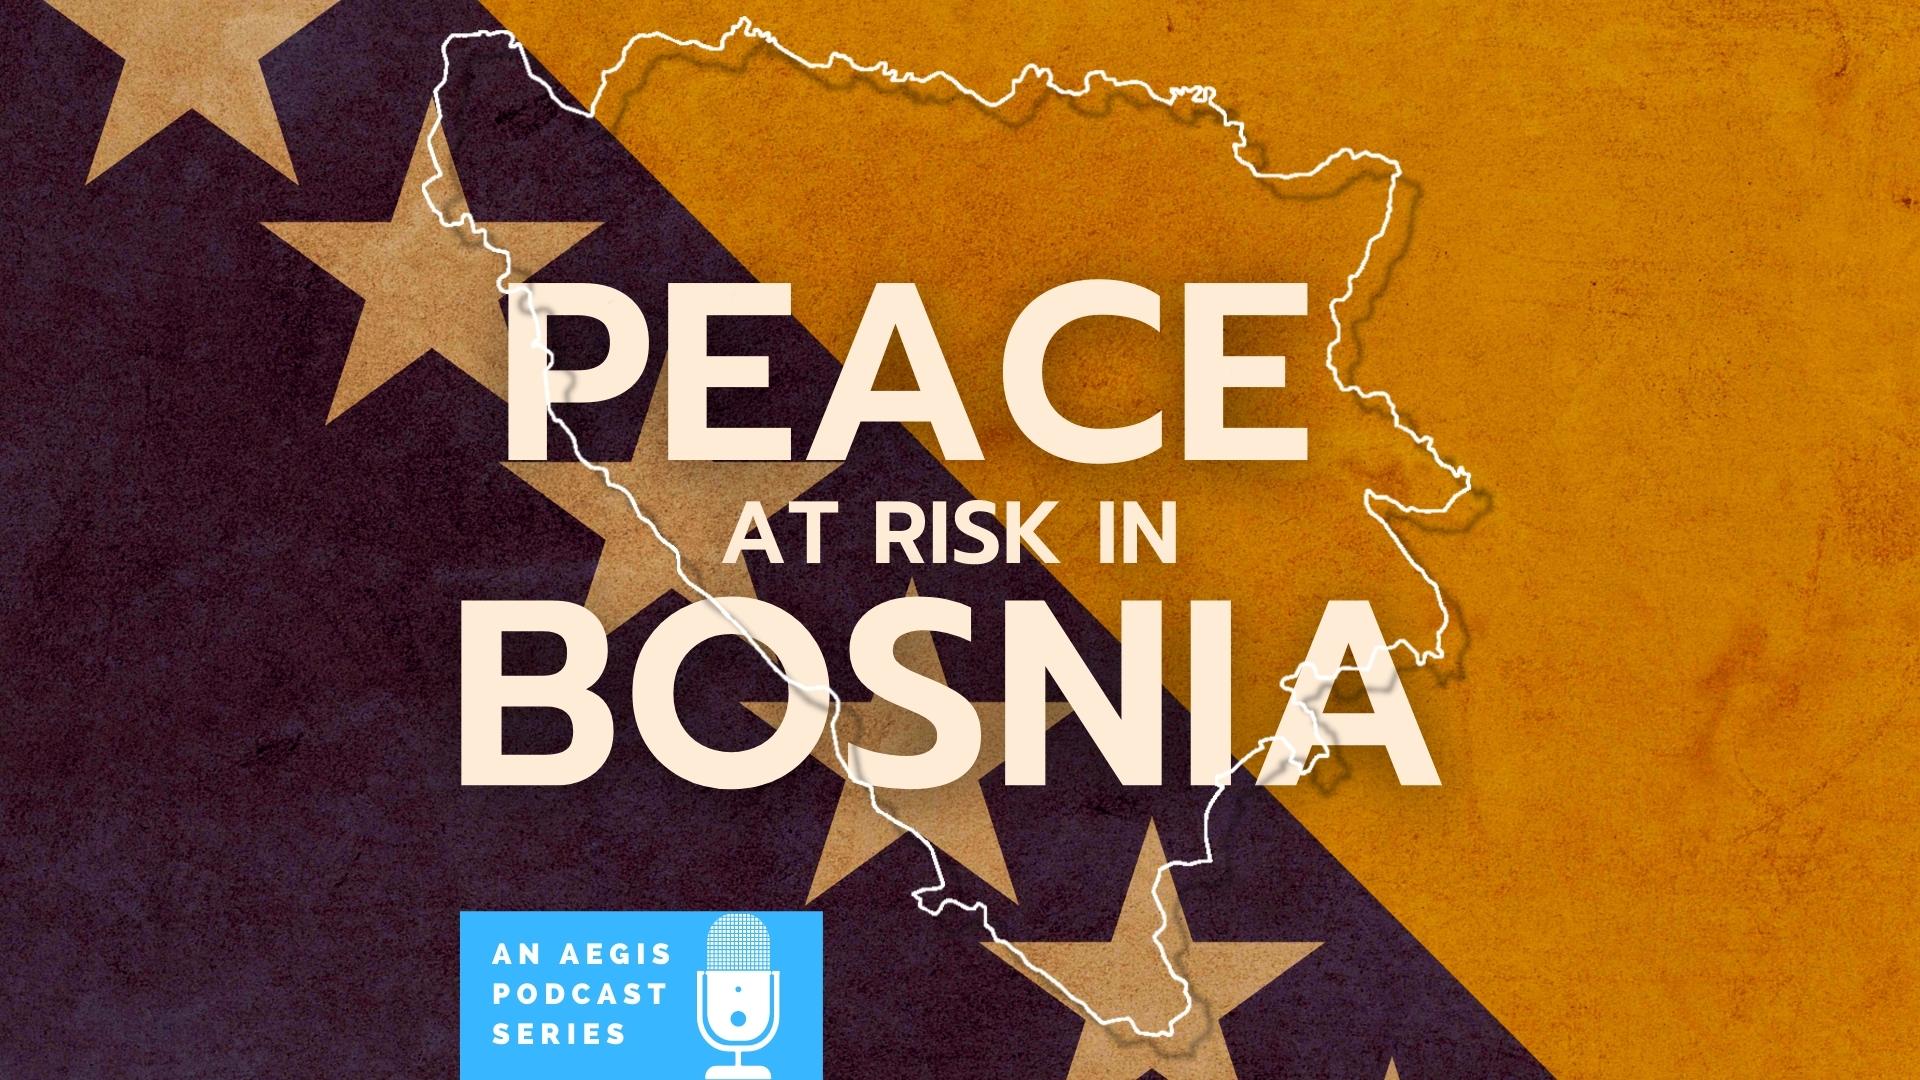 Use your voice to protect peace at risk in Bosnia